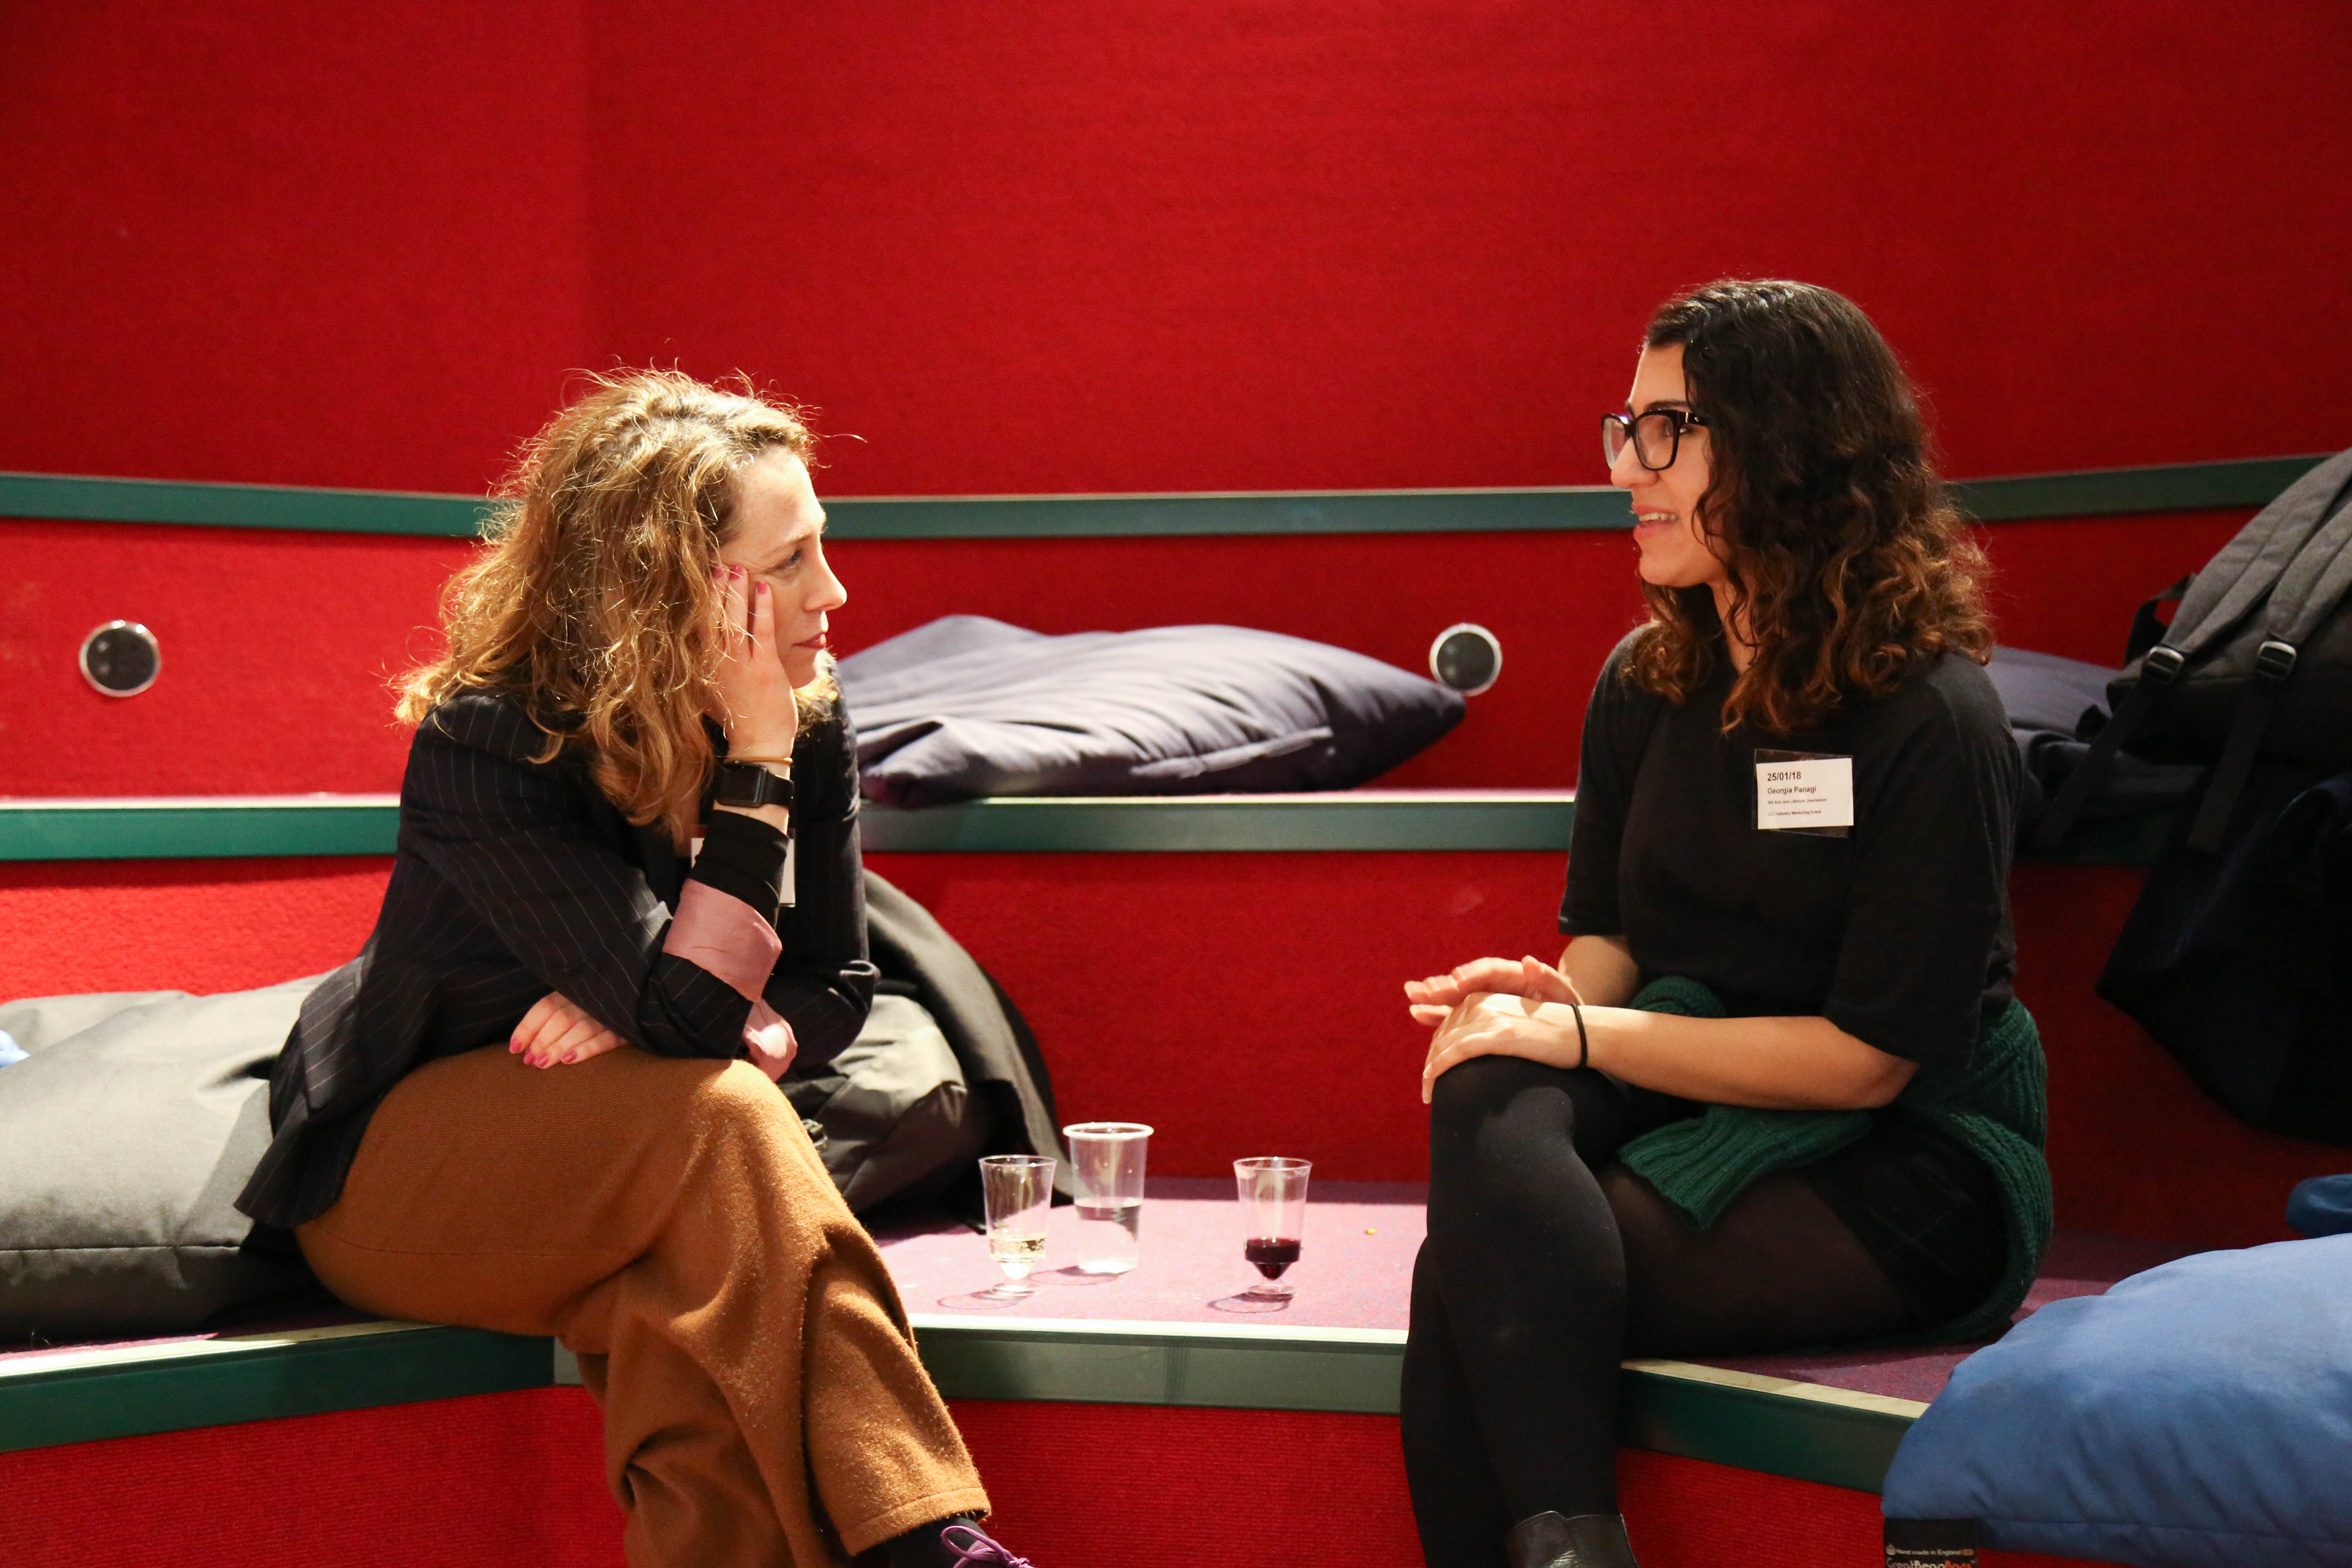 Industry Mentoring Scheme mentor and mentee discuss working in the creative industries